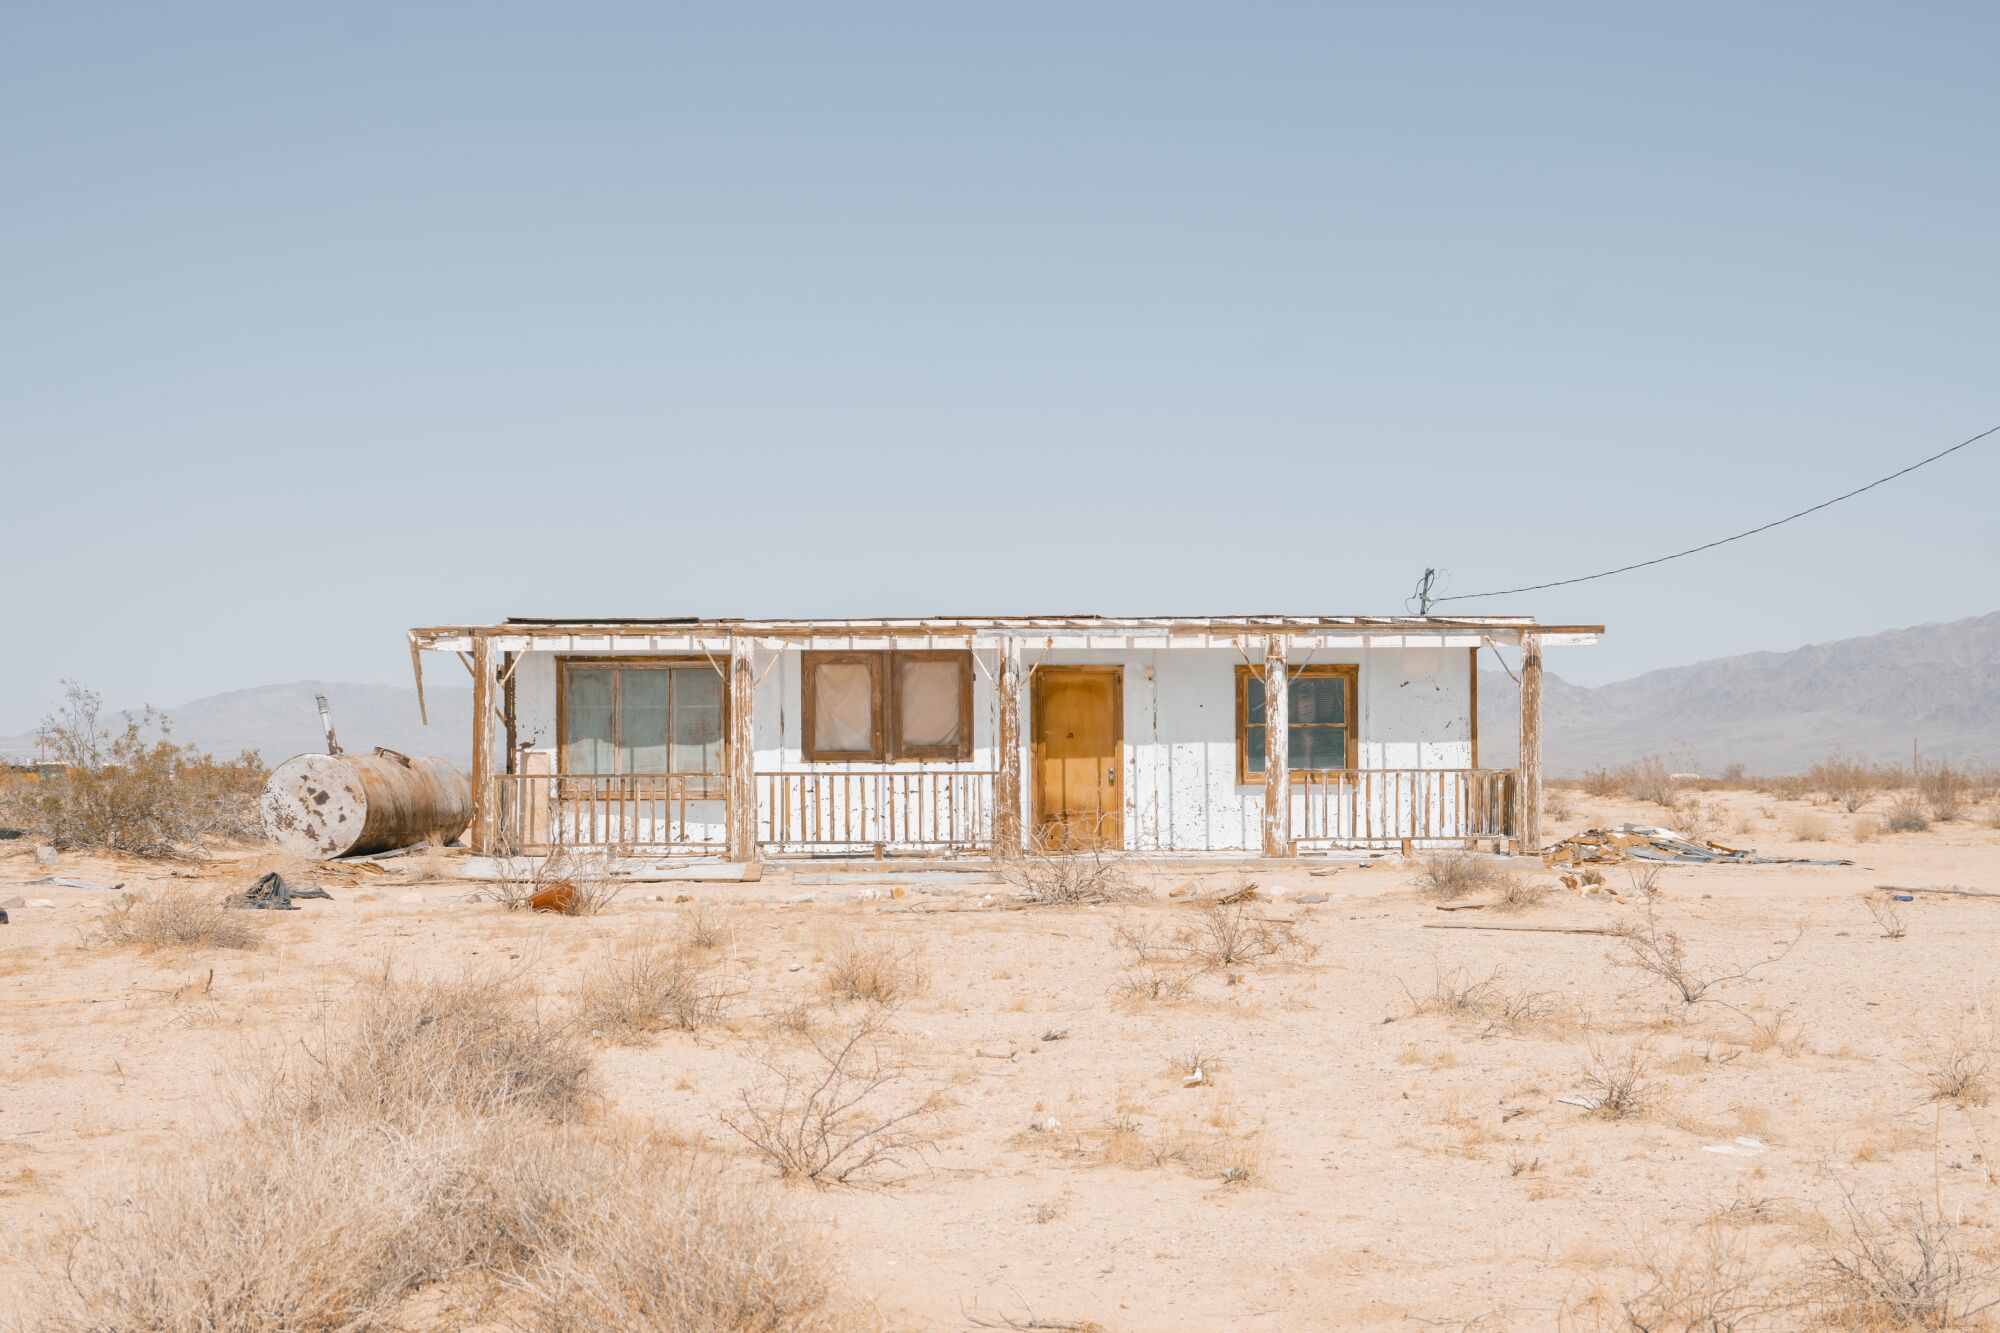 An abandoned boarded up home in the desert.